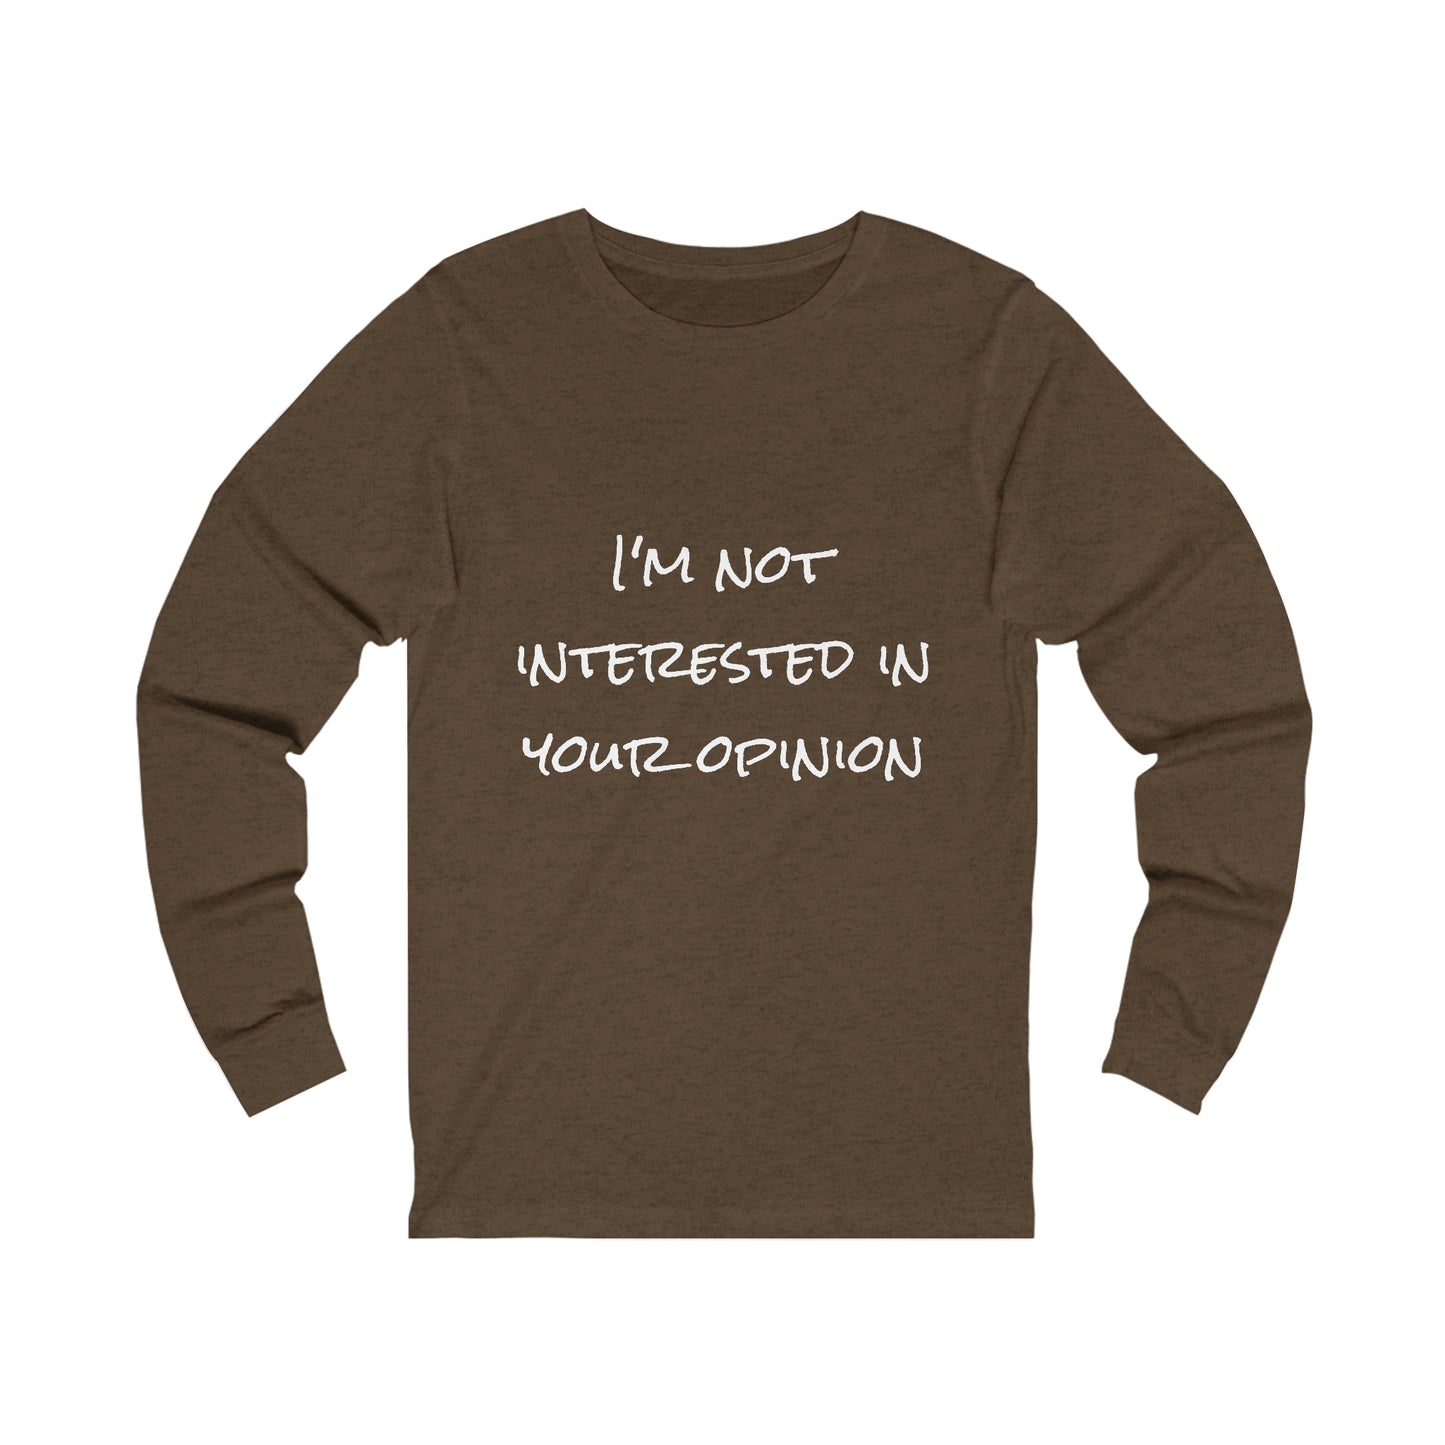 I'm Not Interested in Your Opinion - Unisex Jersey Long Sleeve Tee